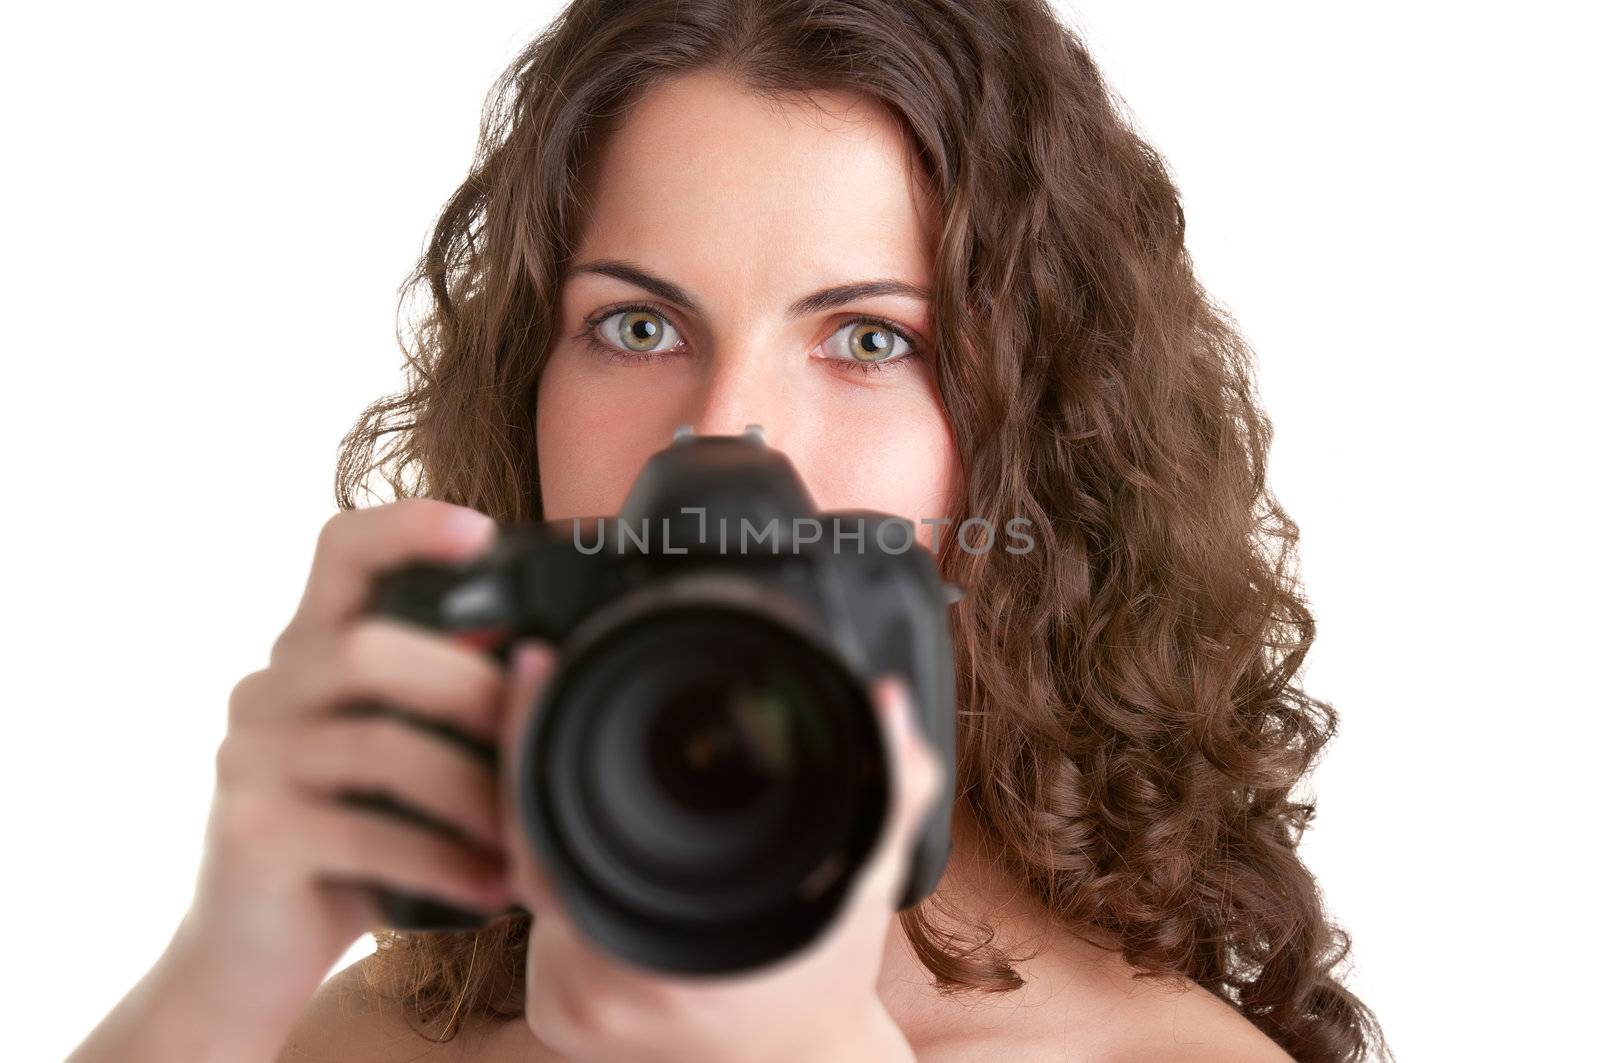 Woman holding an SLR camera, getting ready to take a picture, isolated in white